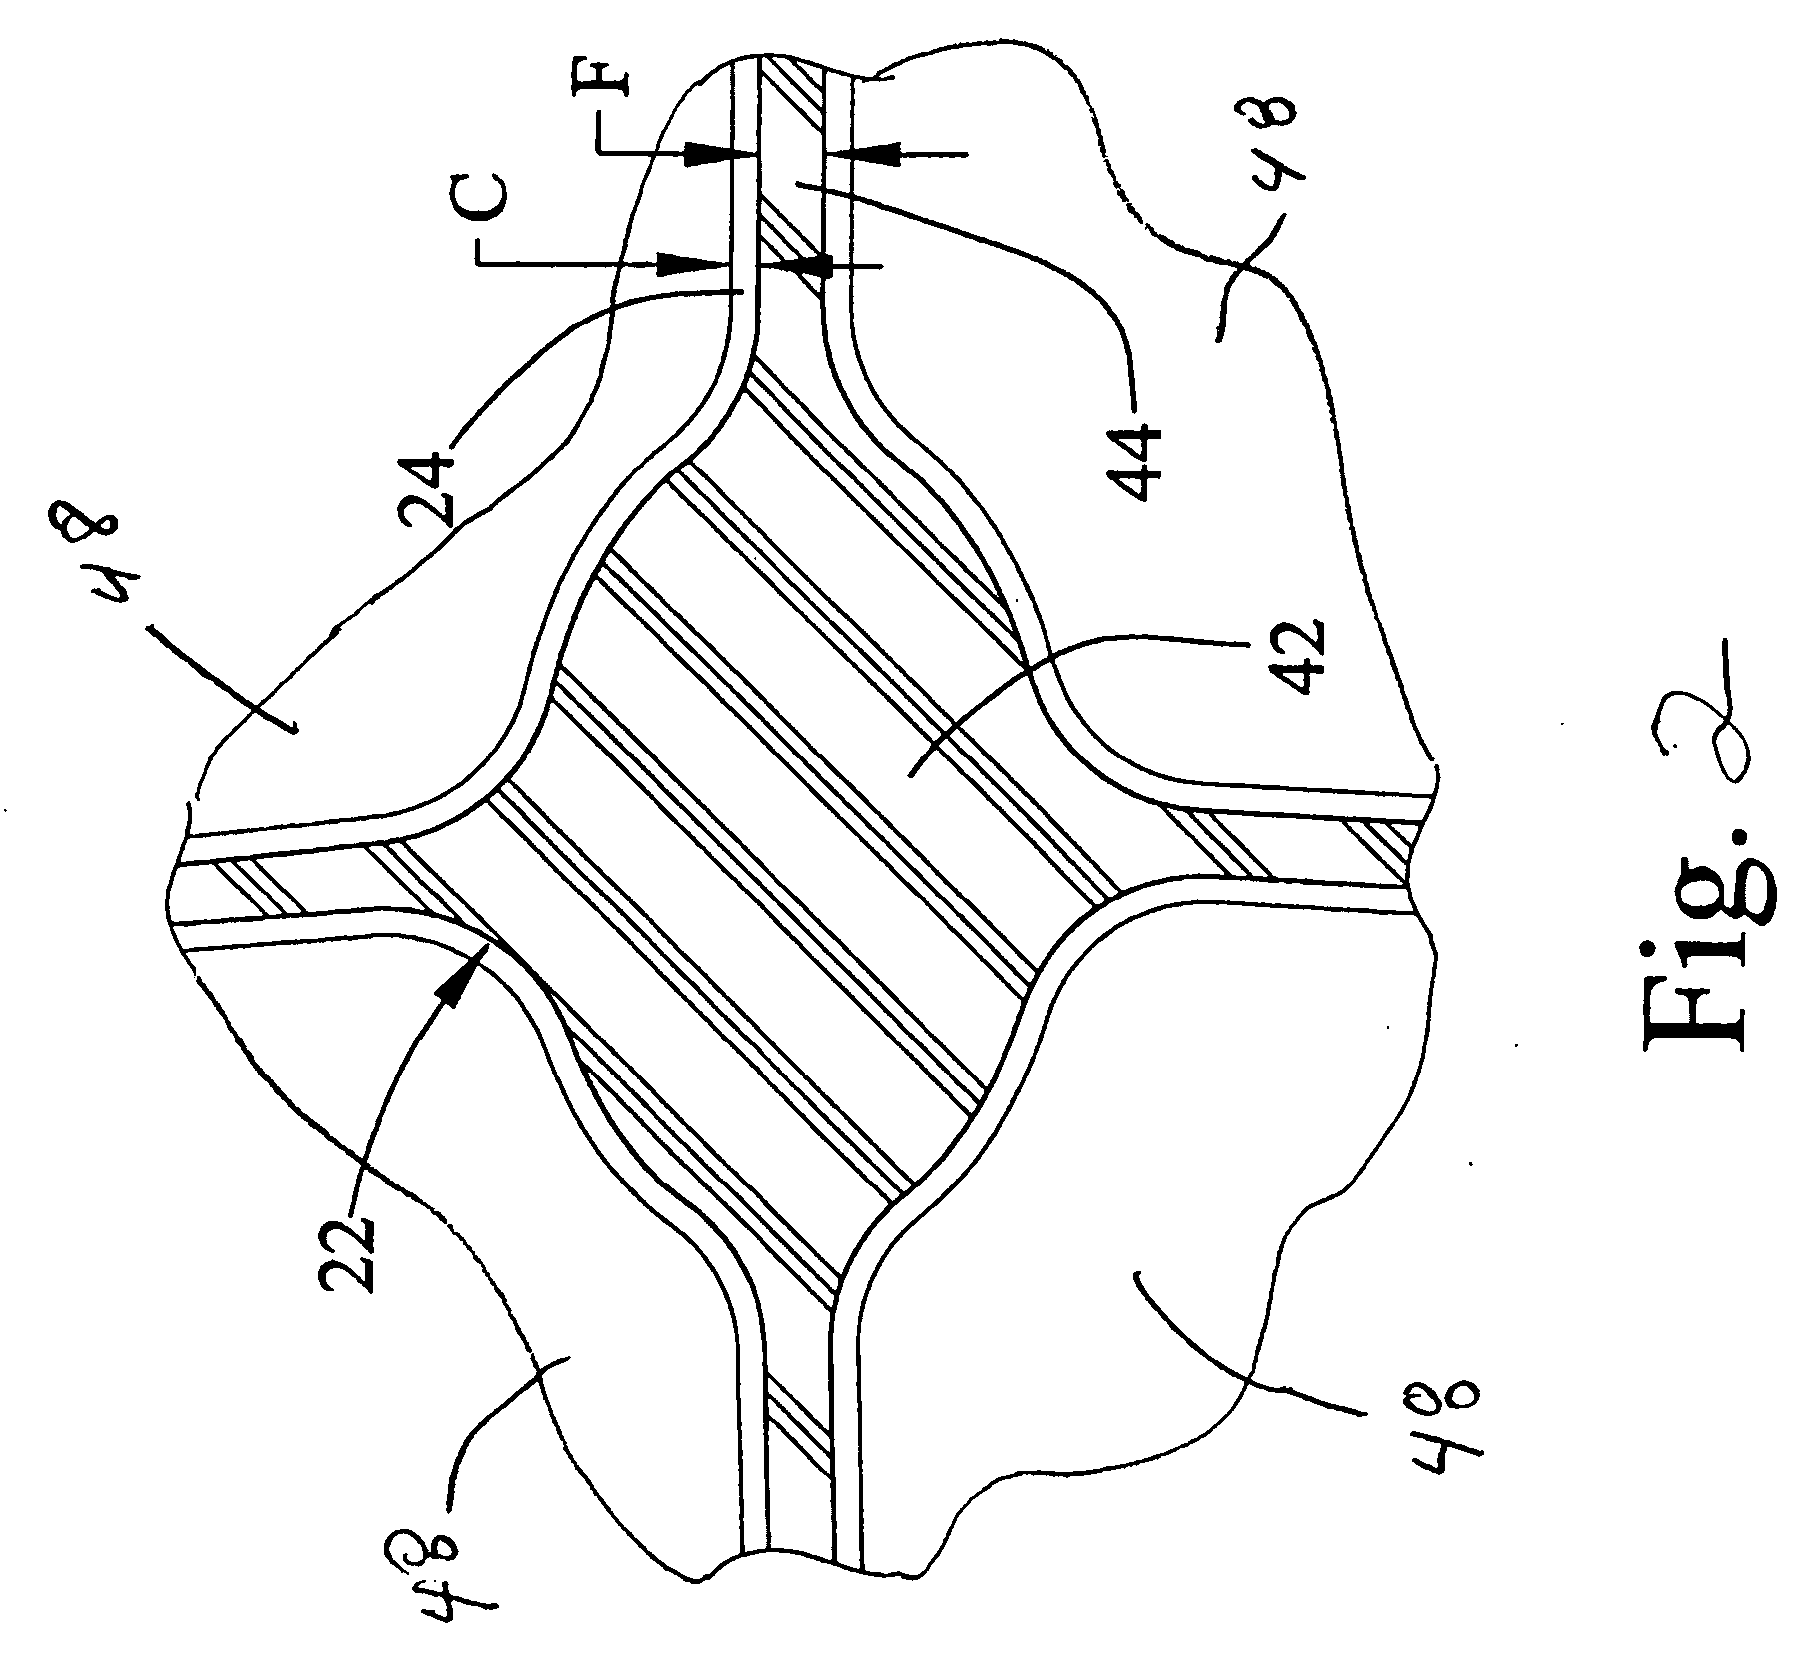 Method of making a composite membrane